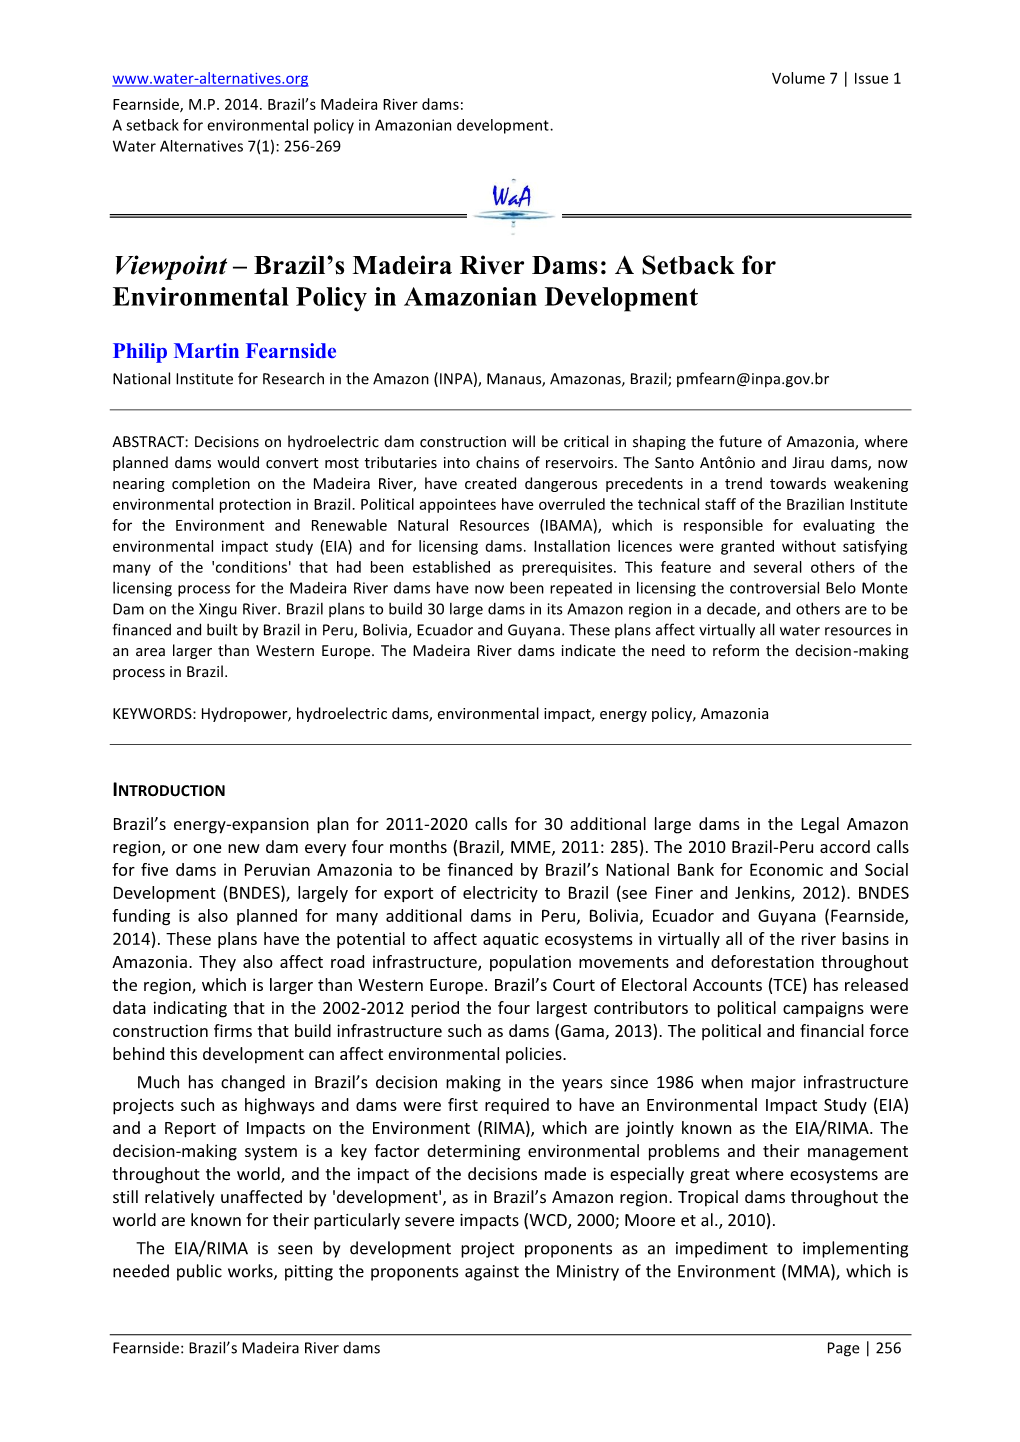 Brazil's Madeira River Dams: a Setback for Environmental Policy In